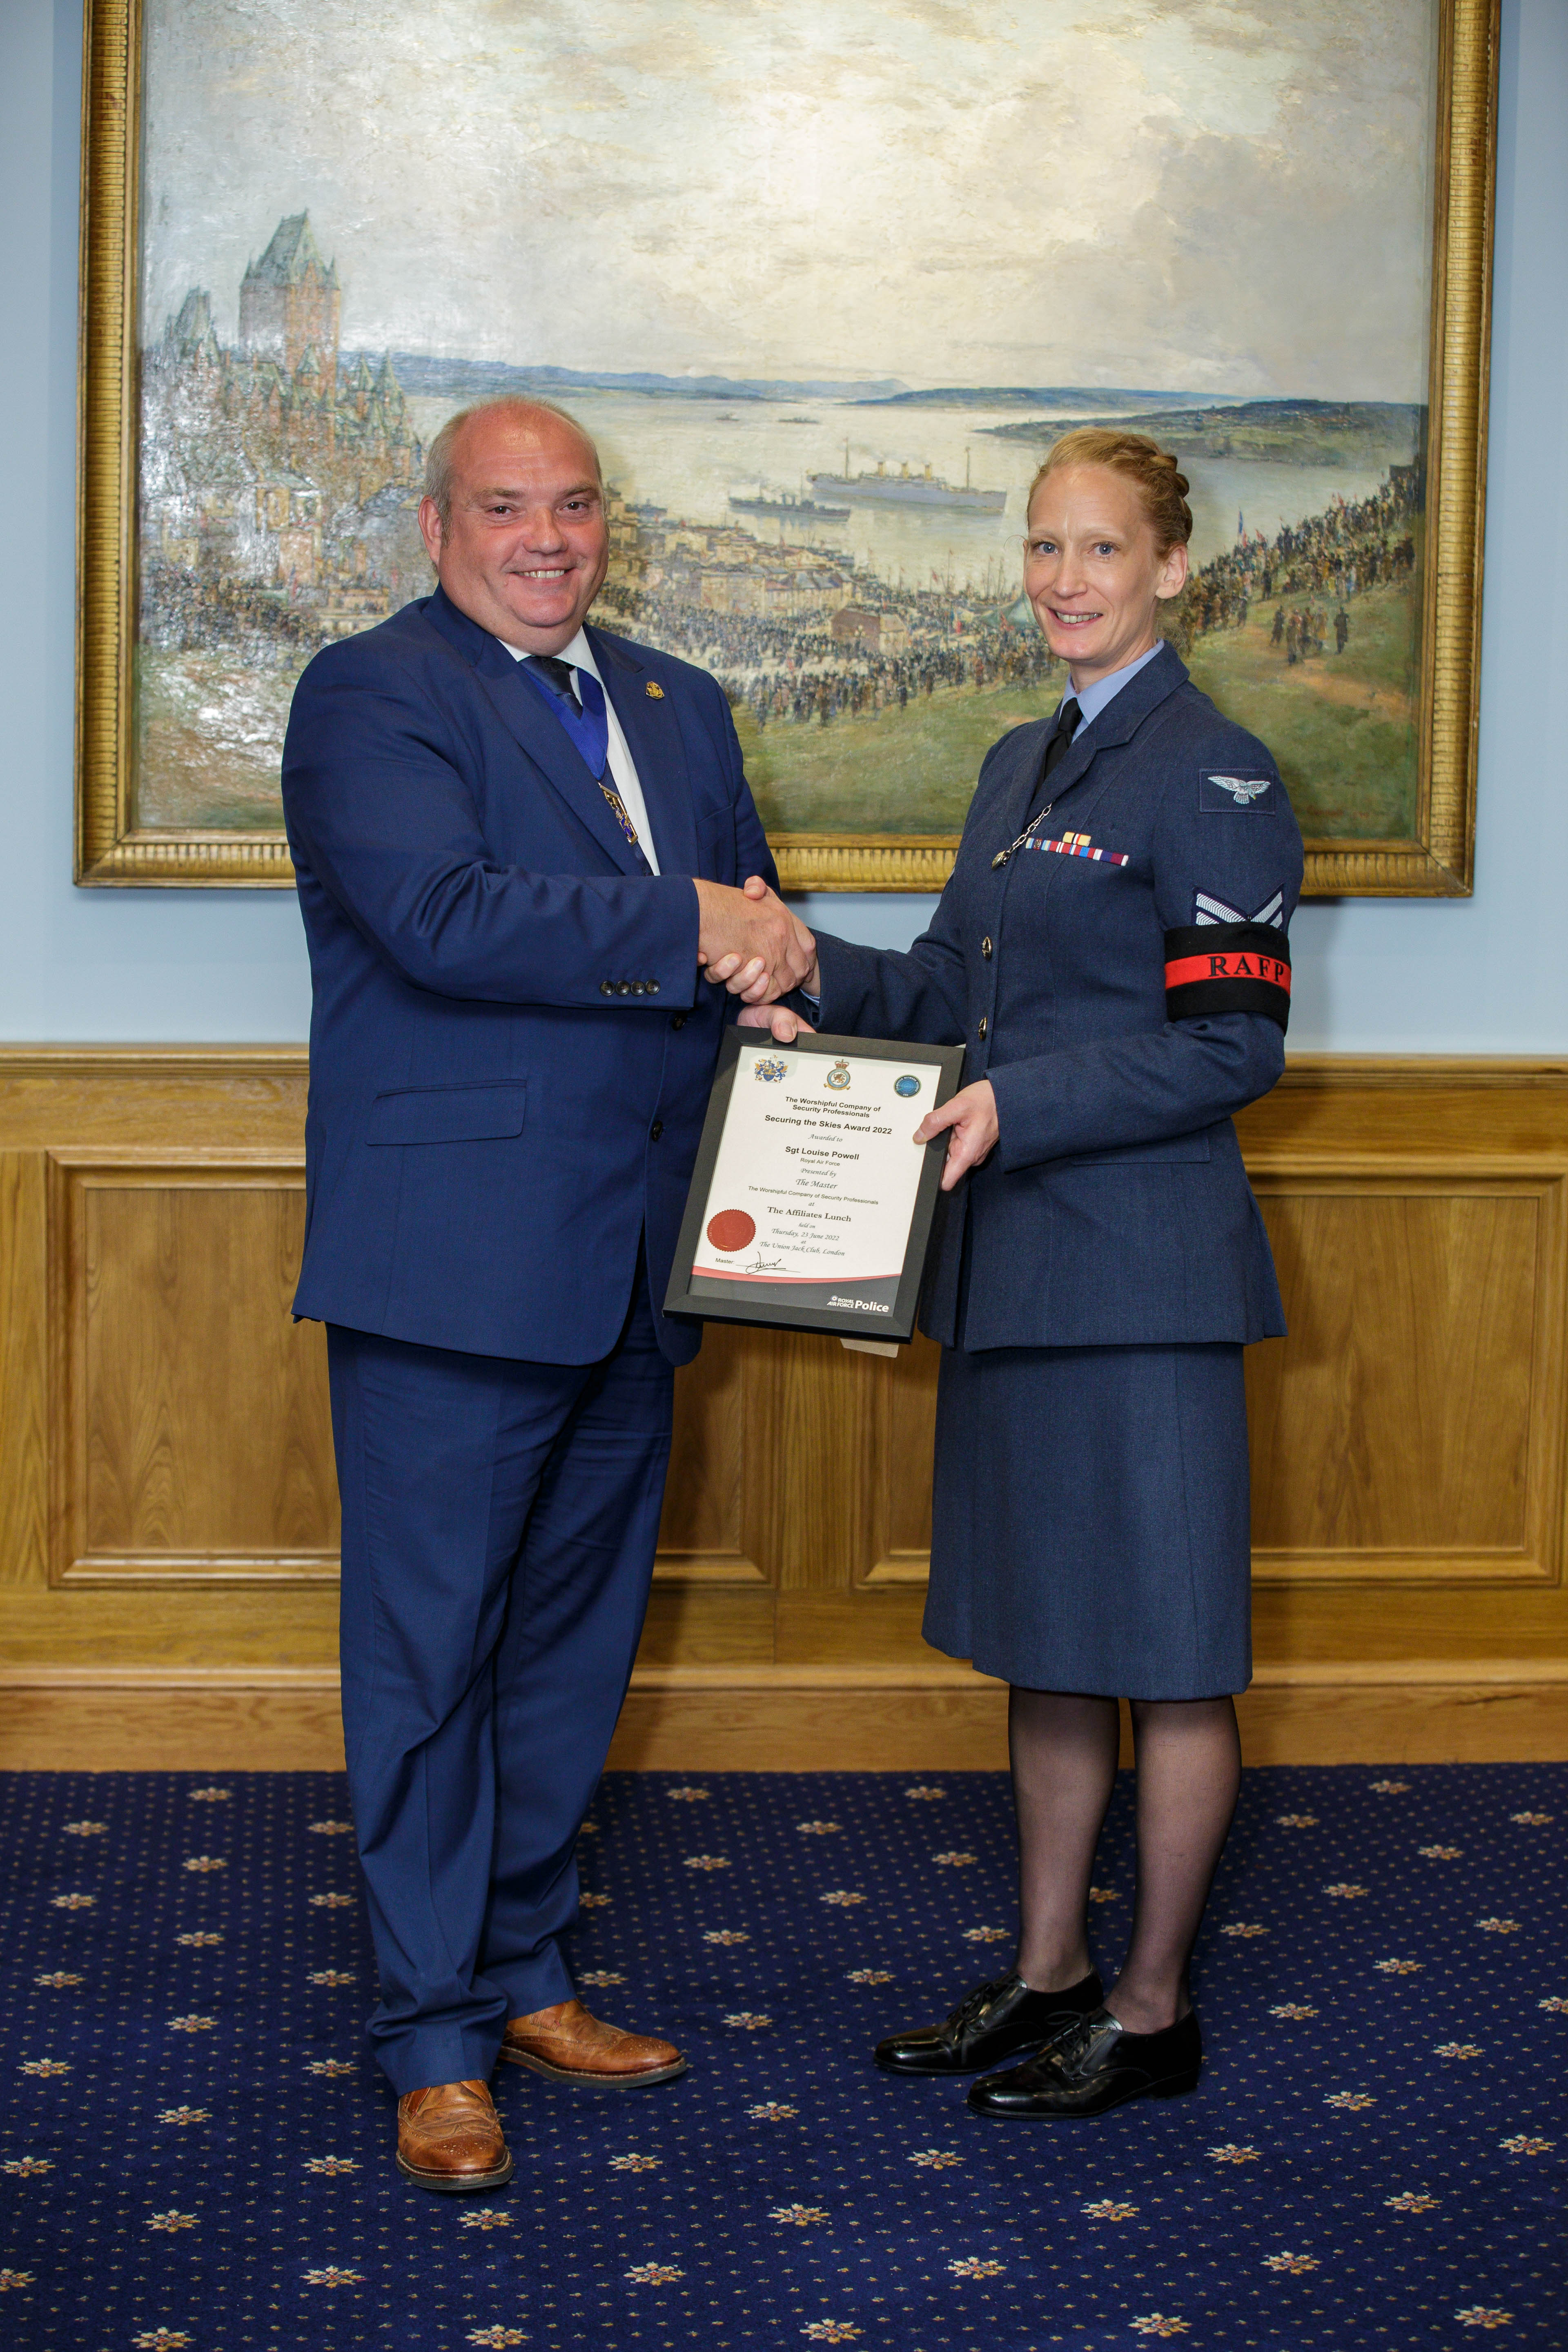 Sgt Powell with her award